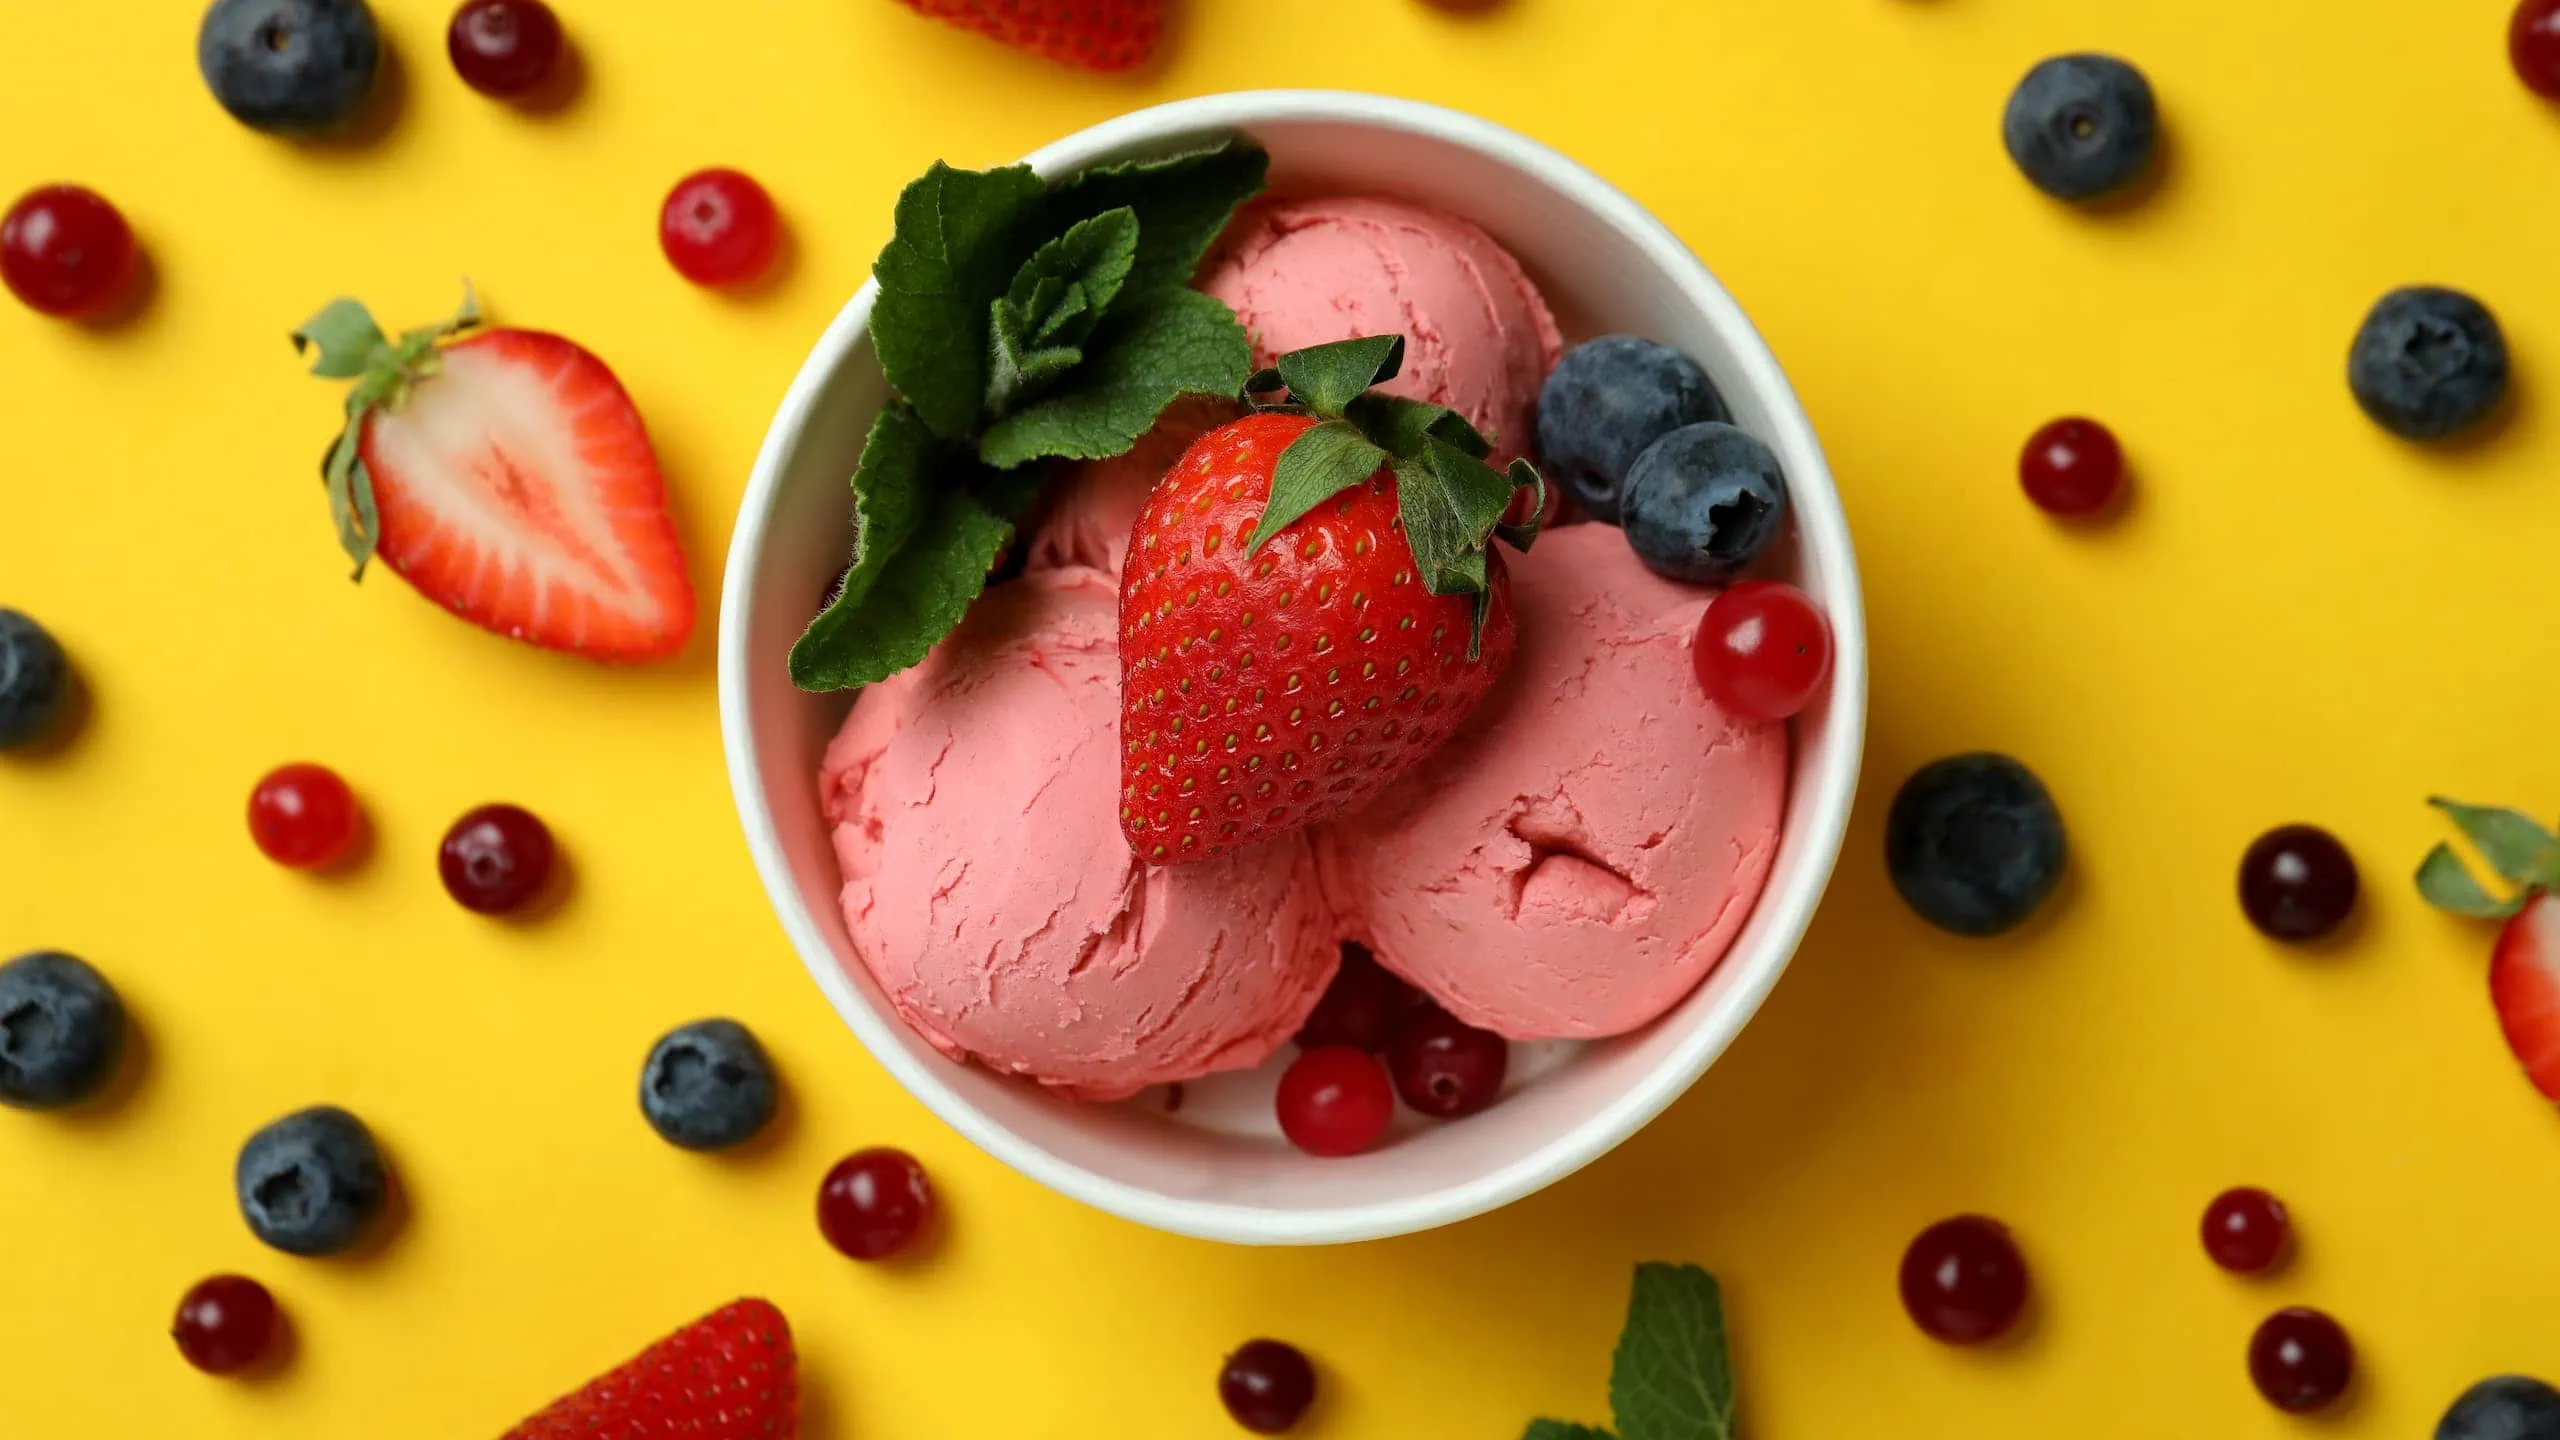 Anabolic ice cream recipe with berries toppings